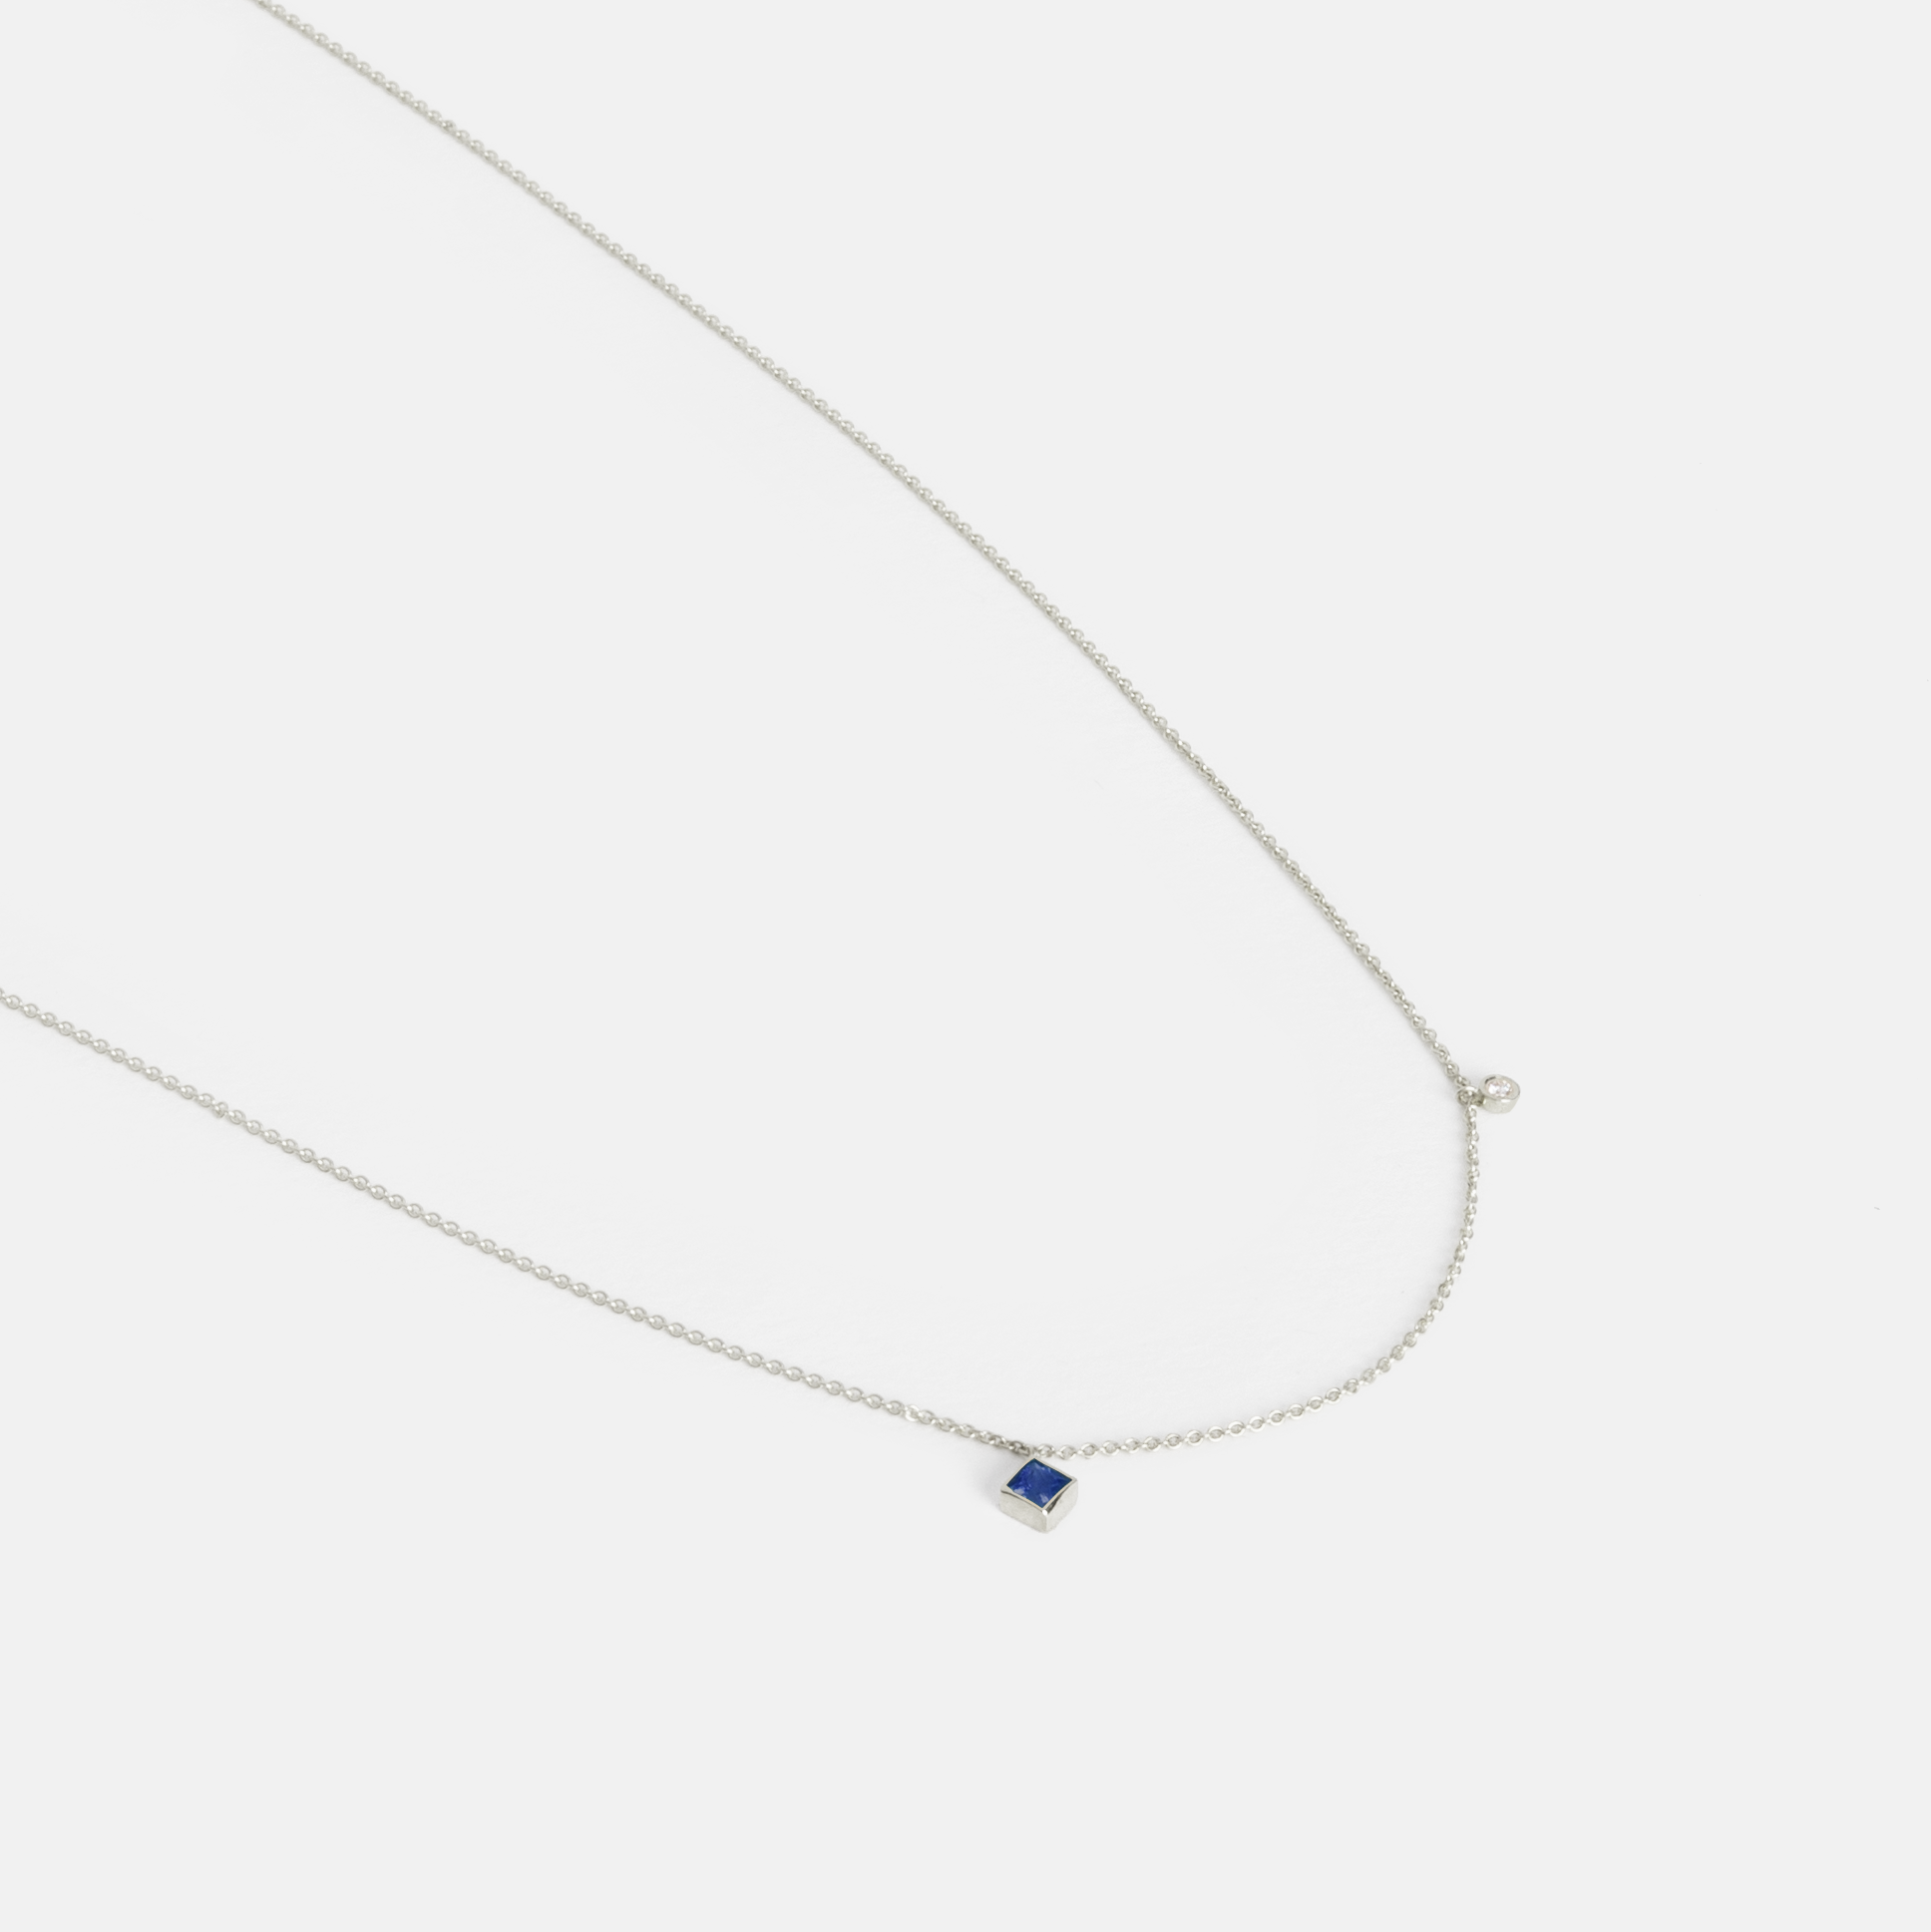 Ibi Handmade Necklace in 14k White Gold set with Sapphire and White Diamond By SHW Fine Jewelry NYC